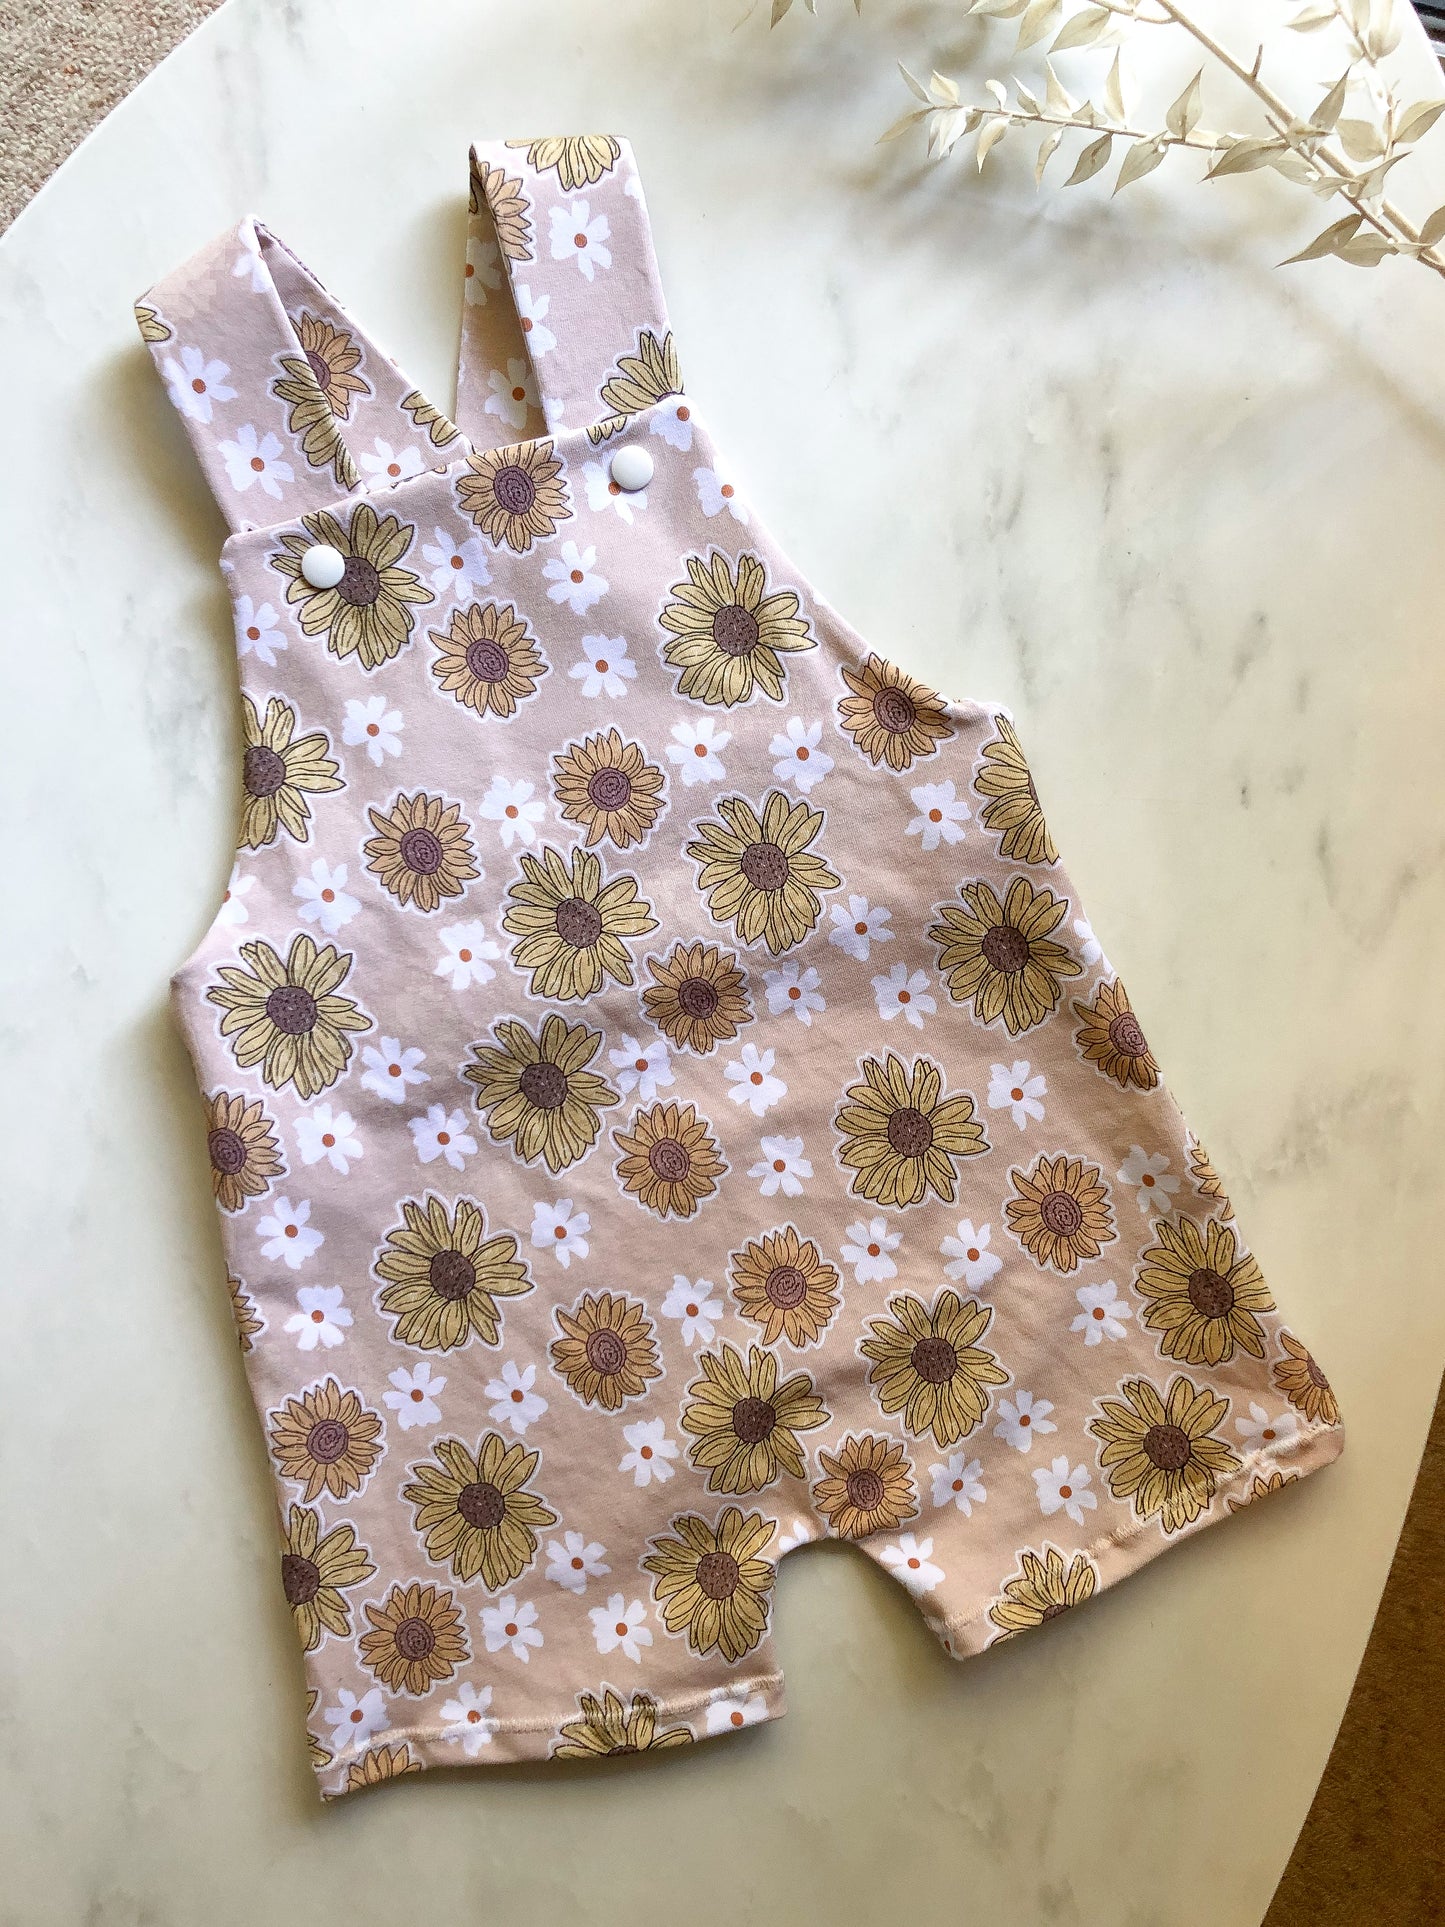 Sunflower and daisy overalls